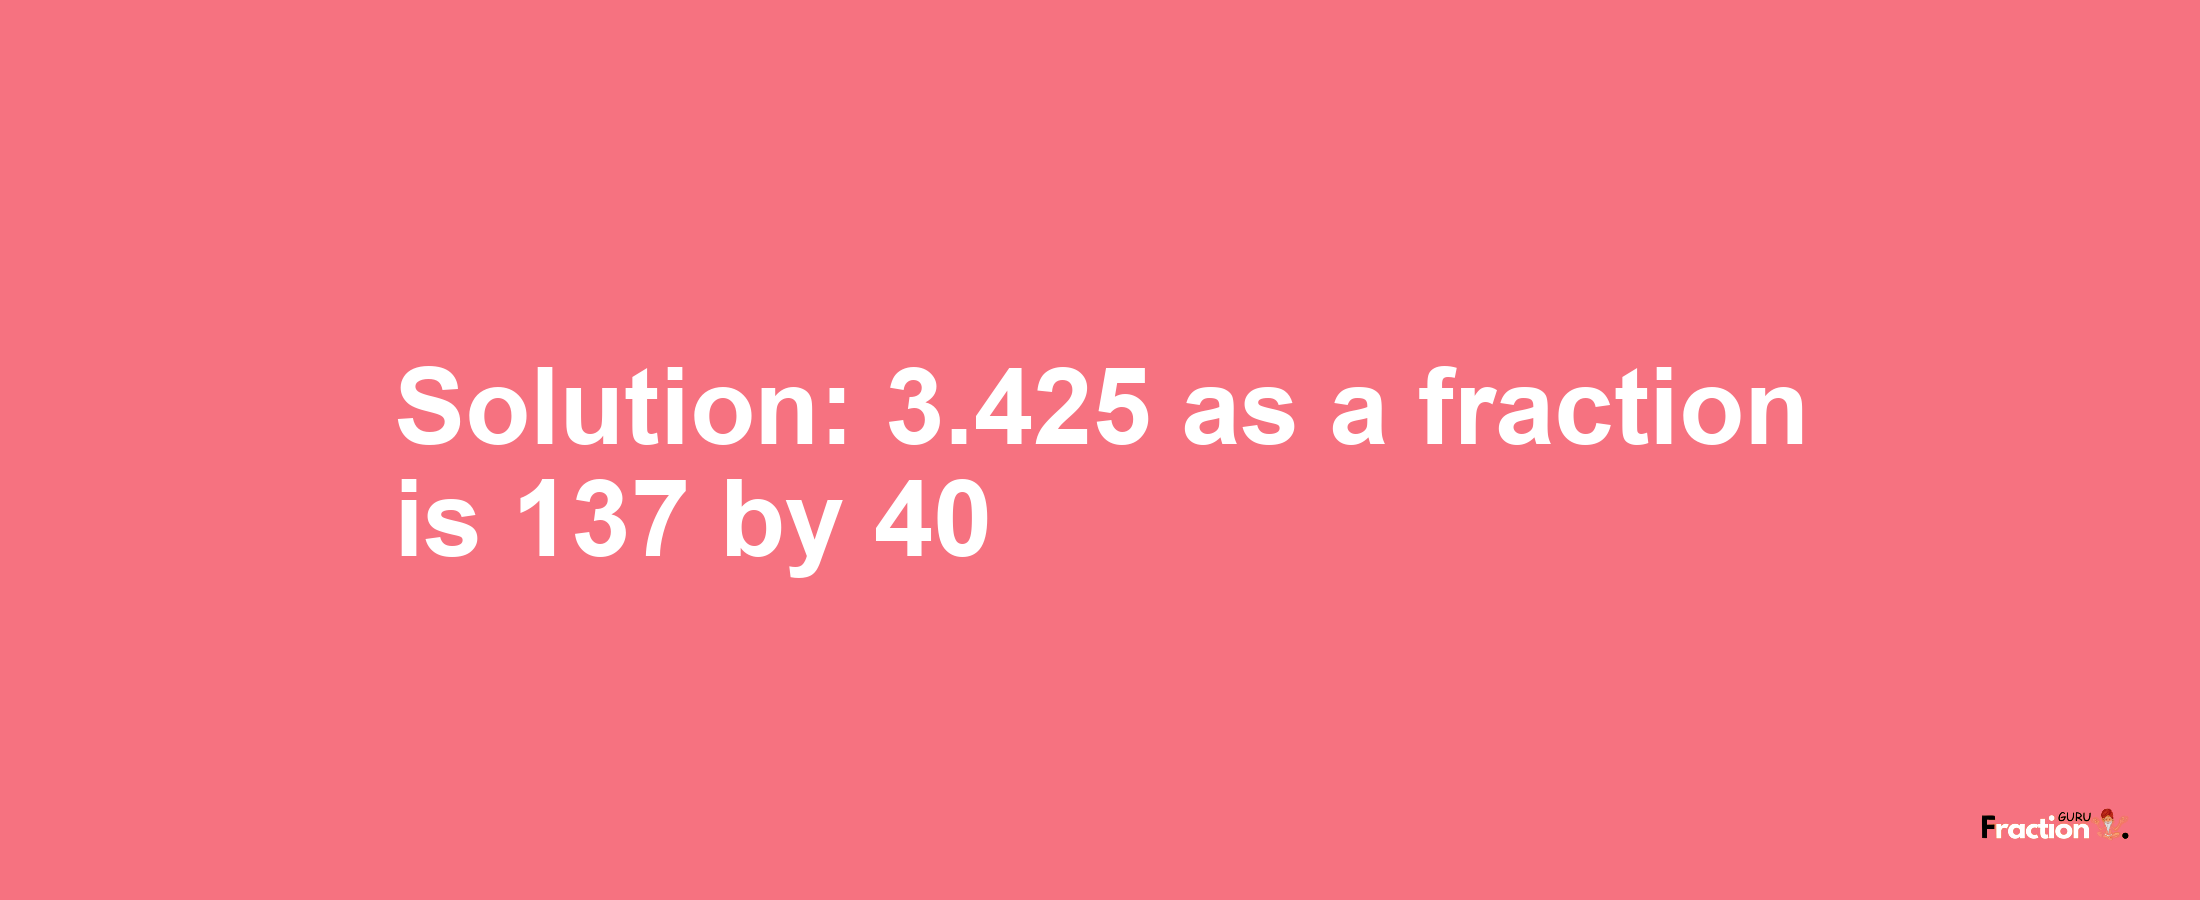 Solution:3.425 as a fraction is 137/40